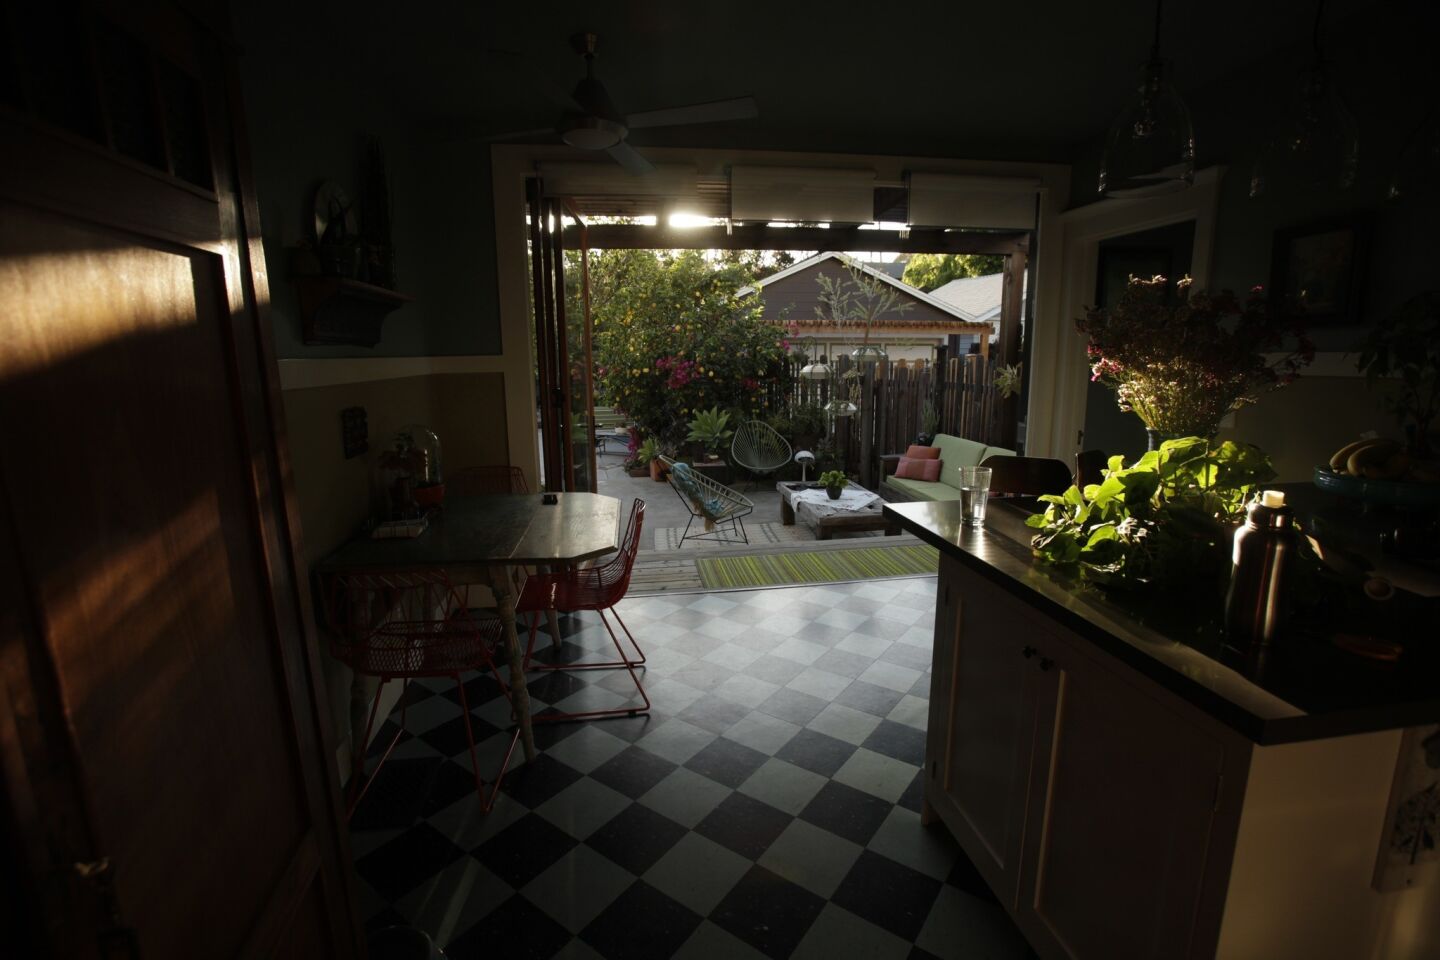 When Gutierrez and her husband remodeled, they wanted an outdoor great room as an extension of the new kitchen.